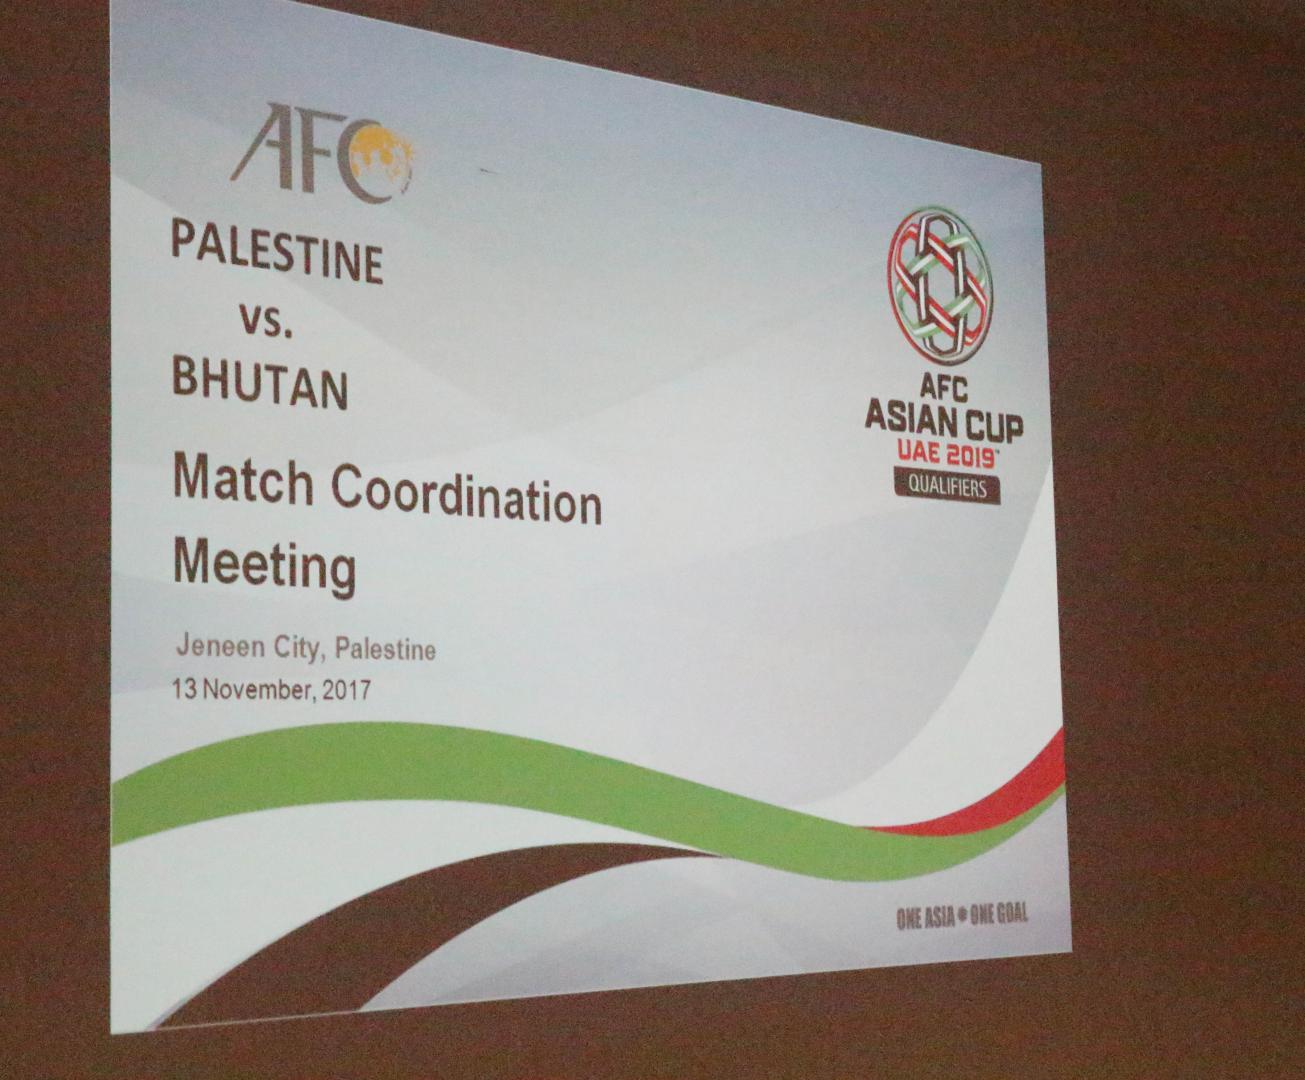 SHOTS FROM THE TECHNICAL CONFERENCE FOR THE MATCH BETWEEN PALESTINE AND MALDIVES TEAMS